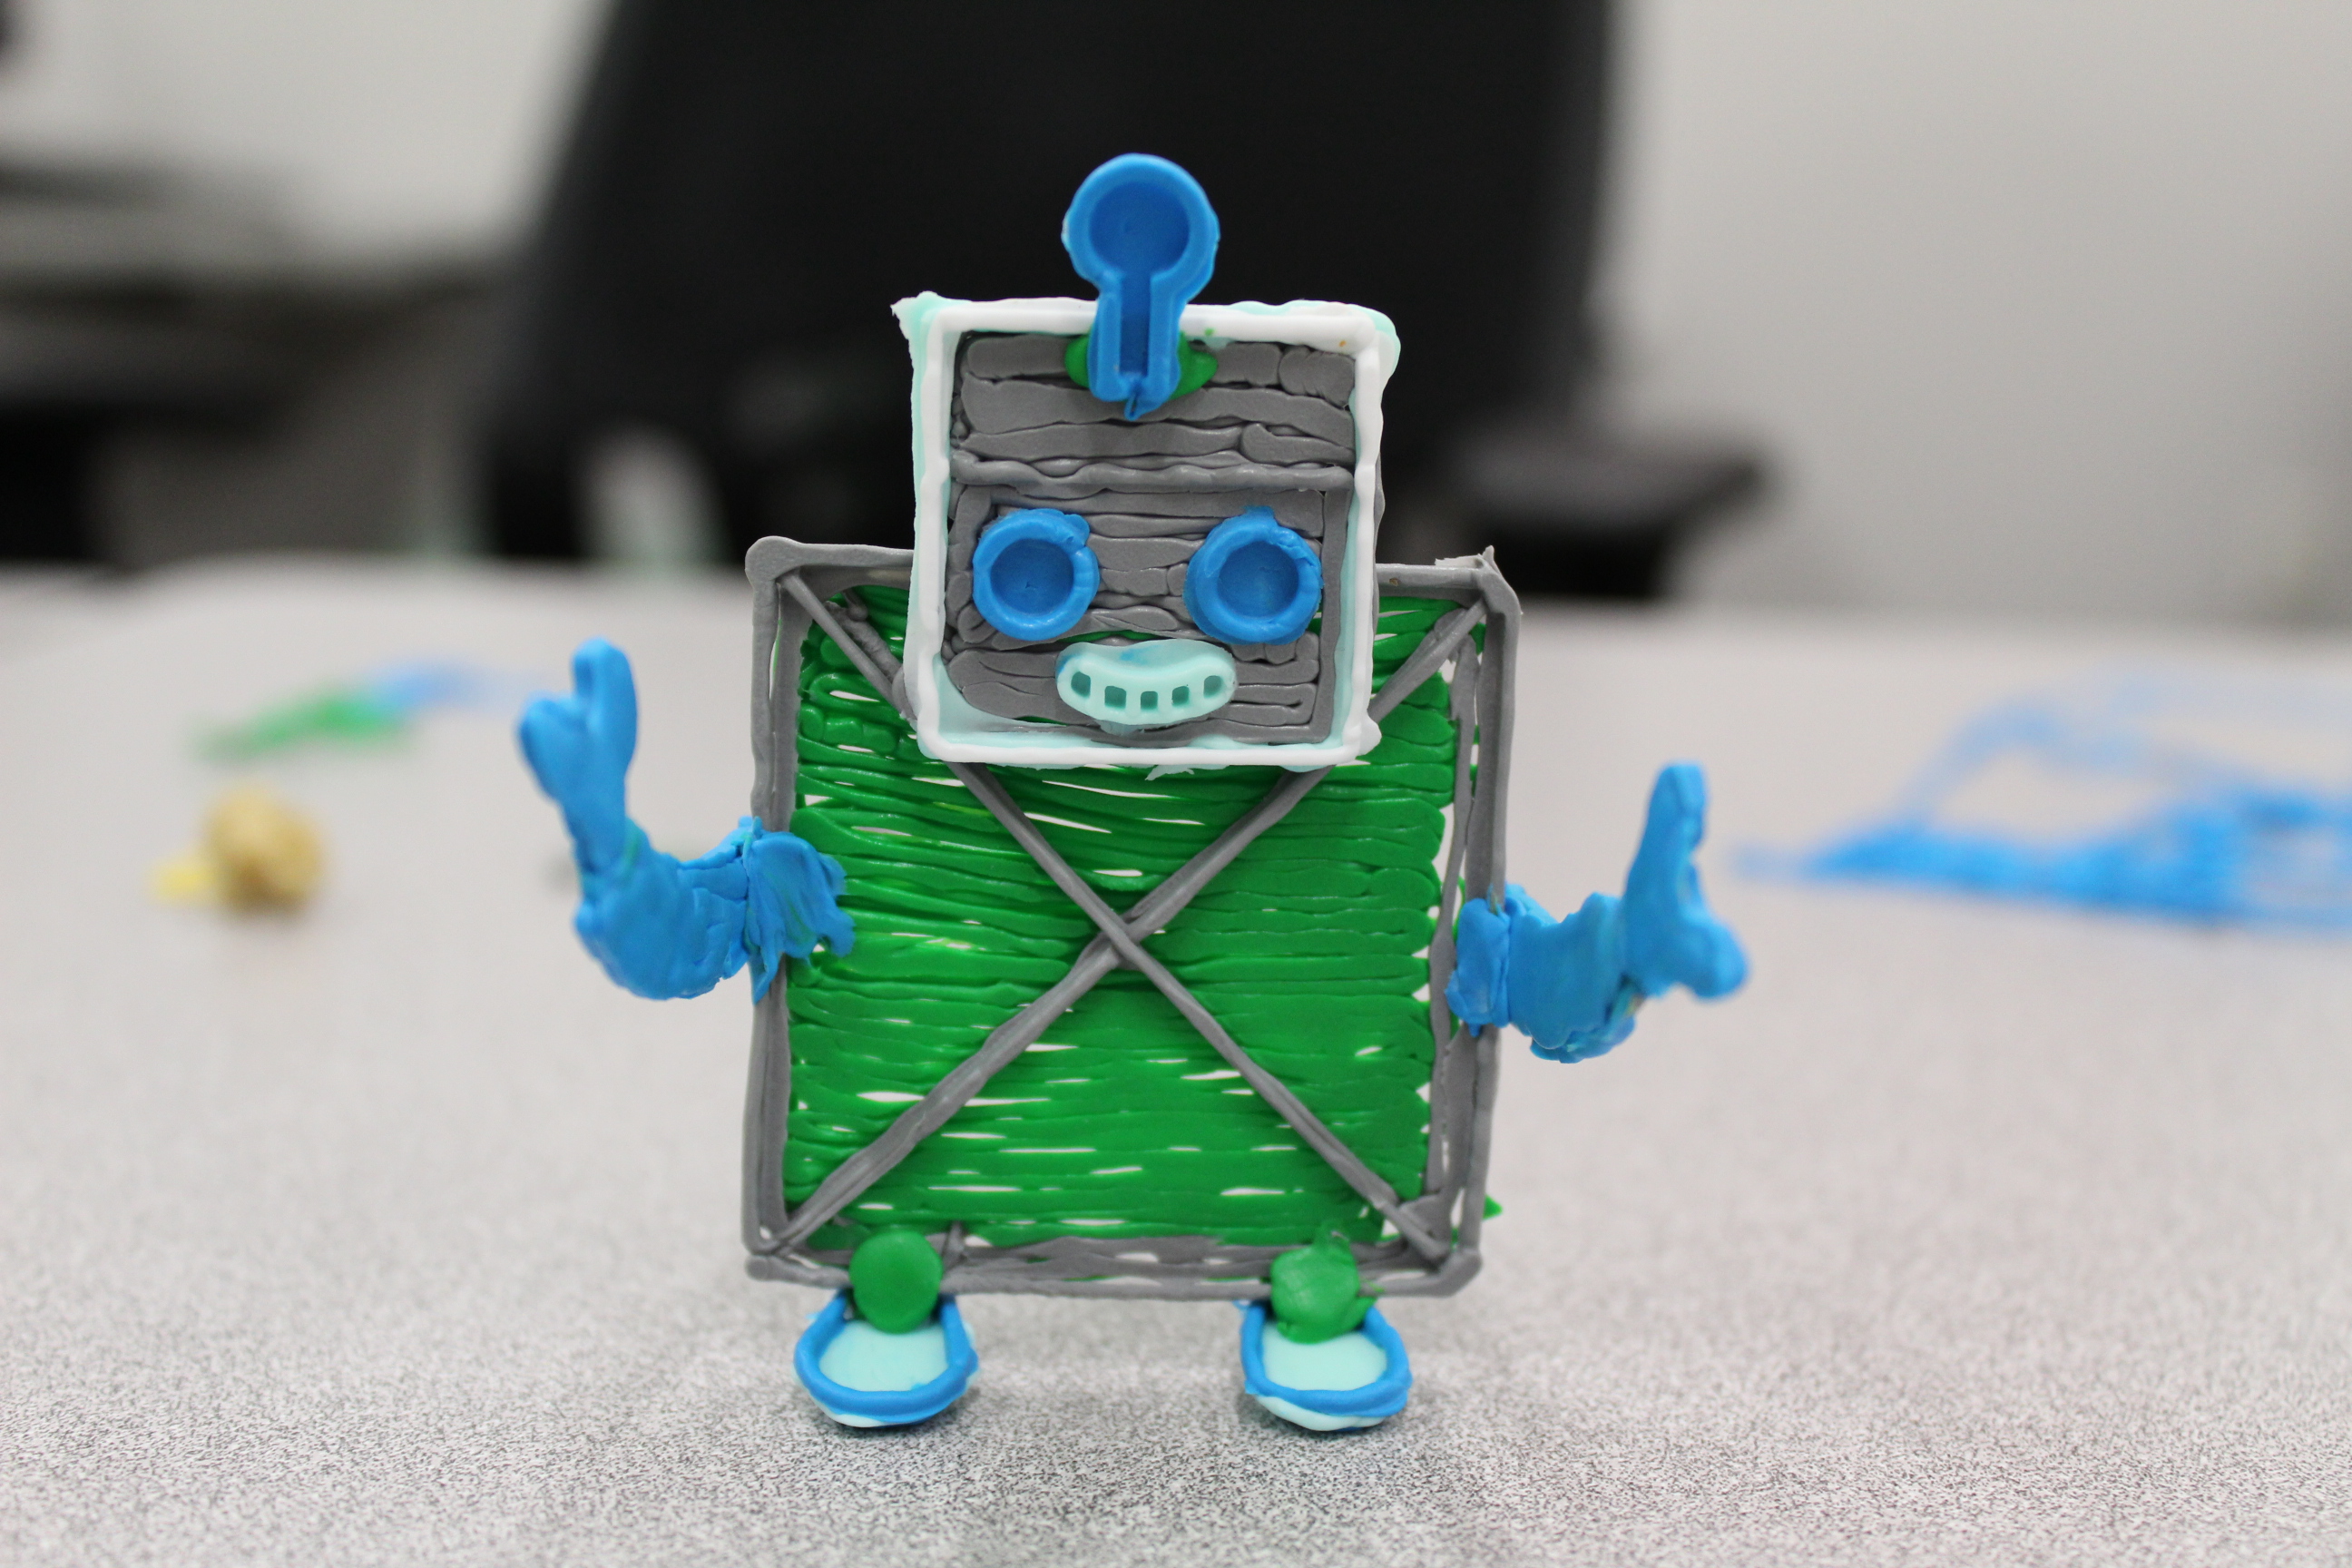 Jamie created this robot figure with the 3Doodler